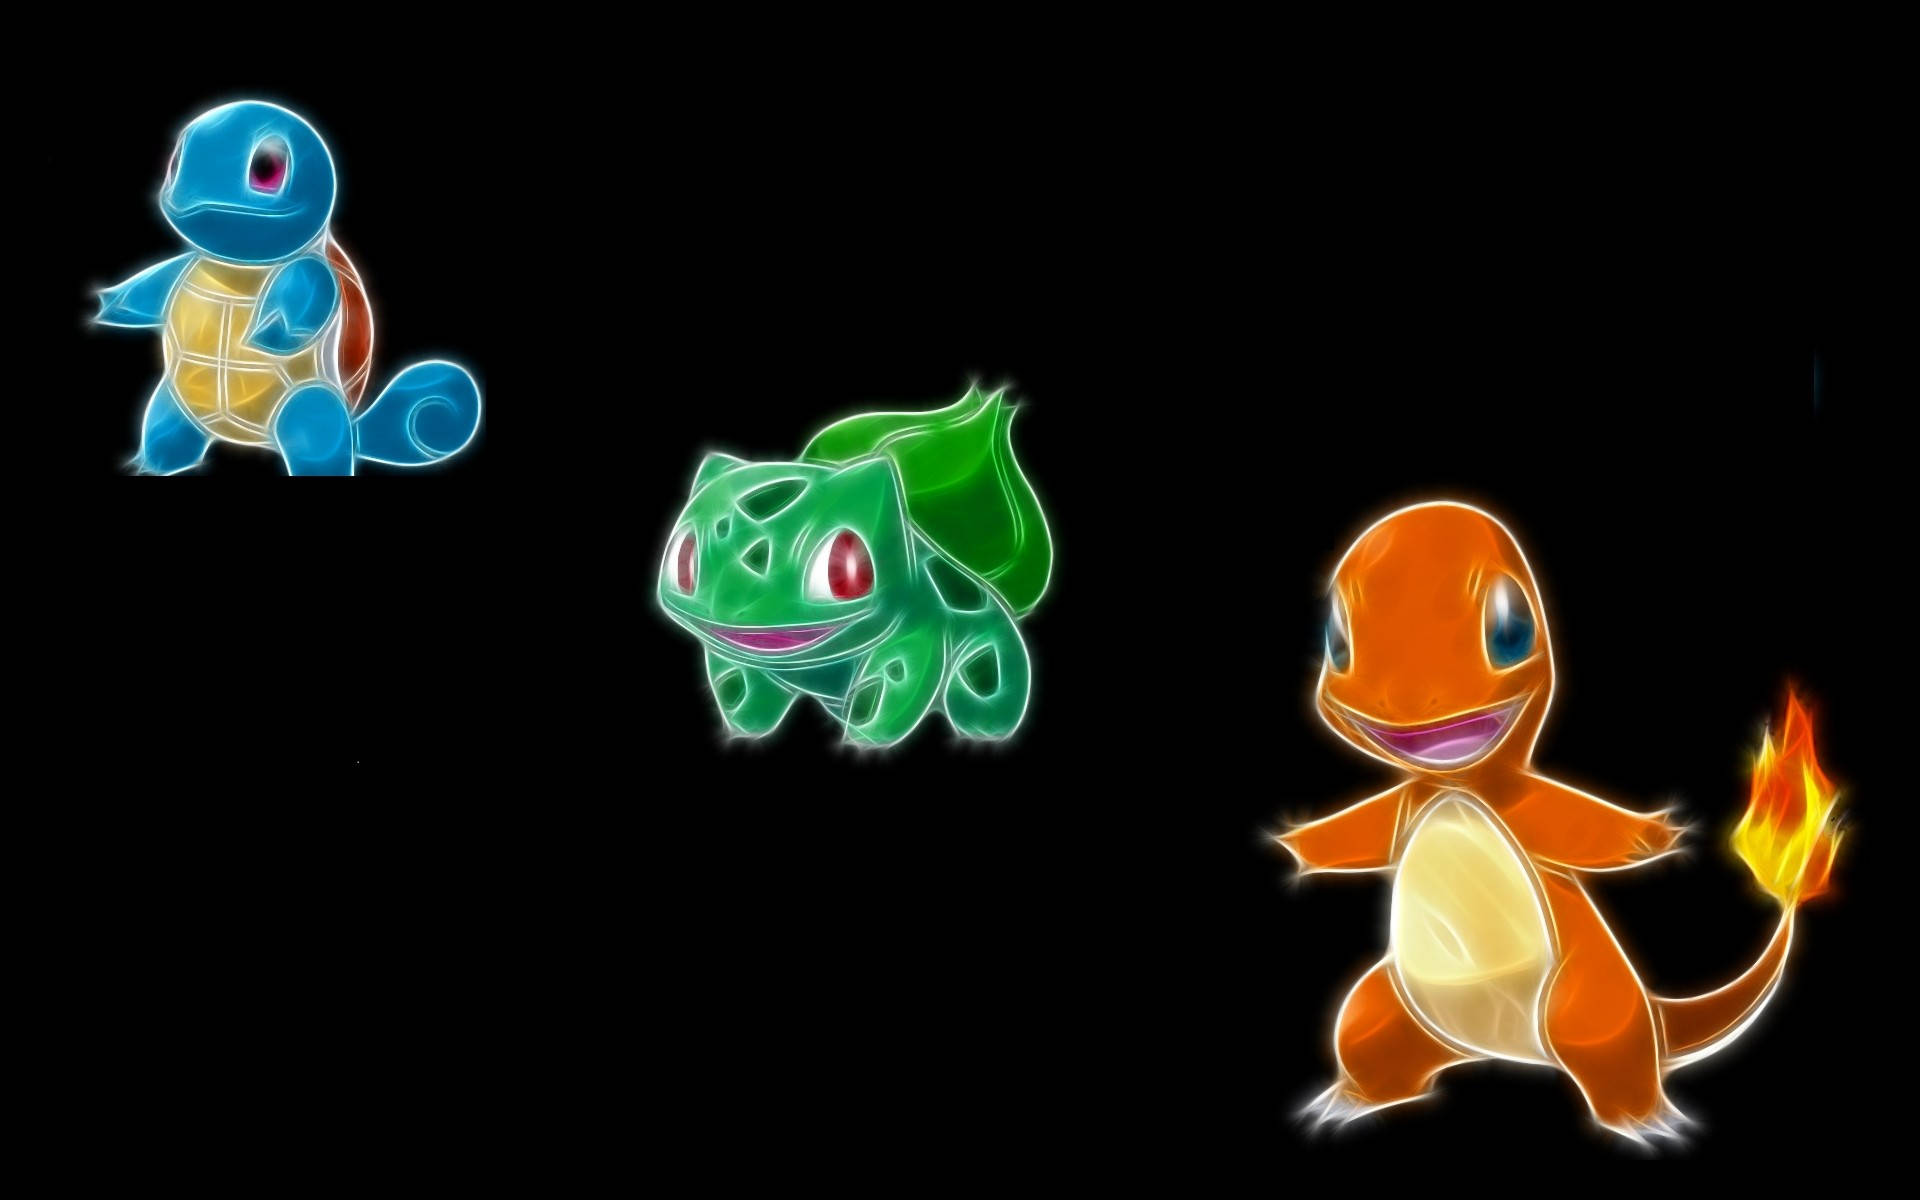 Squirtle, Bulbasaur, And Charmander Gather For An Adventure